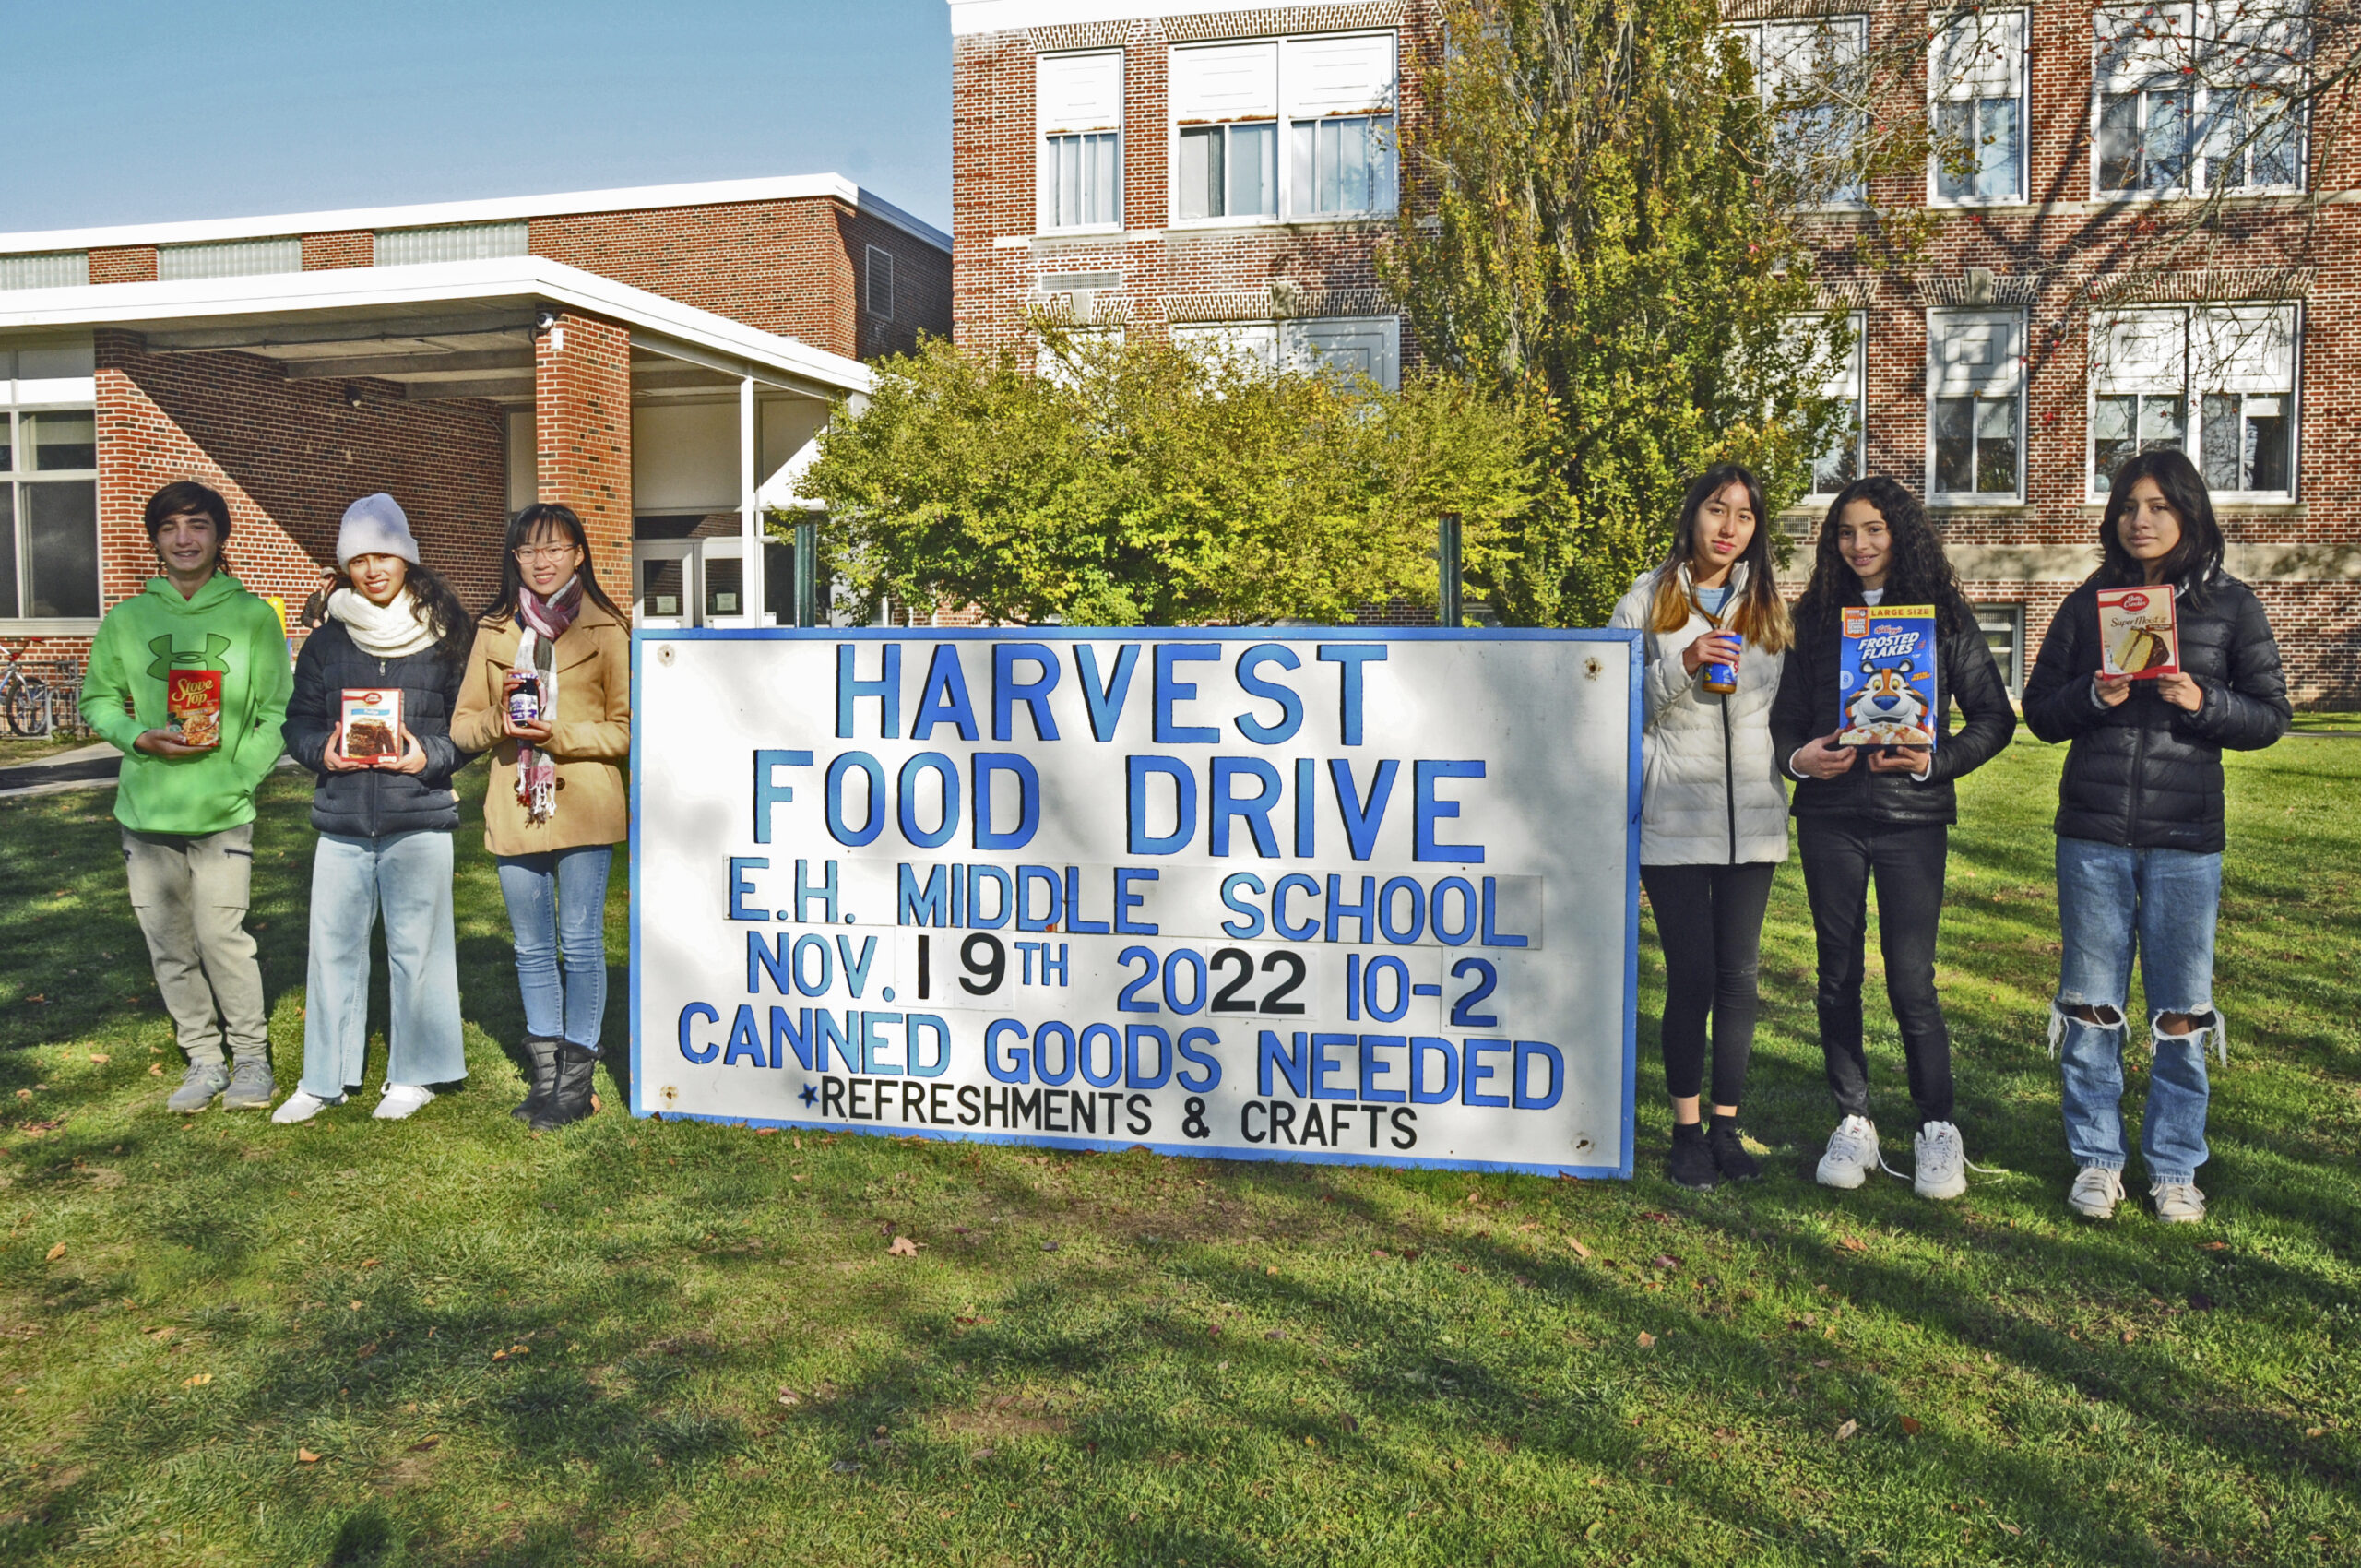 East Hampton Food Pantry set up shop  in front of the East Hampton Middle School on November 18 to accept donations of packaged foods. Student volunteers shuttled back and forth across the street, where they asked for donations outside Stop & Shop.  Pictured are student volunteers, Sean Merkert, Sophia Herrera, Thuy Nguyen, Kimberly Atiencia, Laura Martinez and Sarah Gonzalez    RICHARD LEWIN